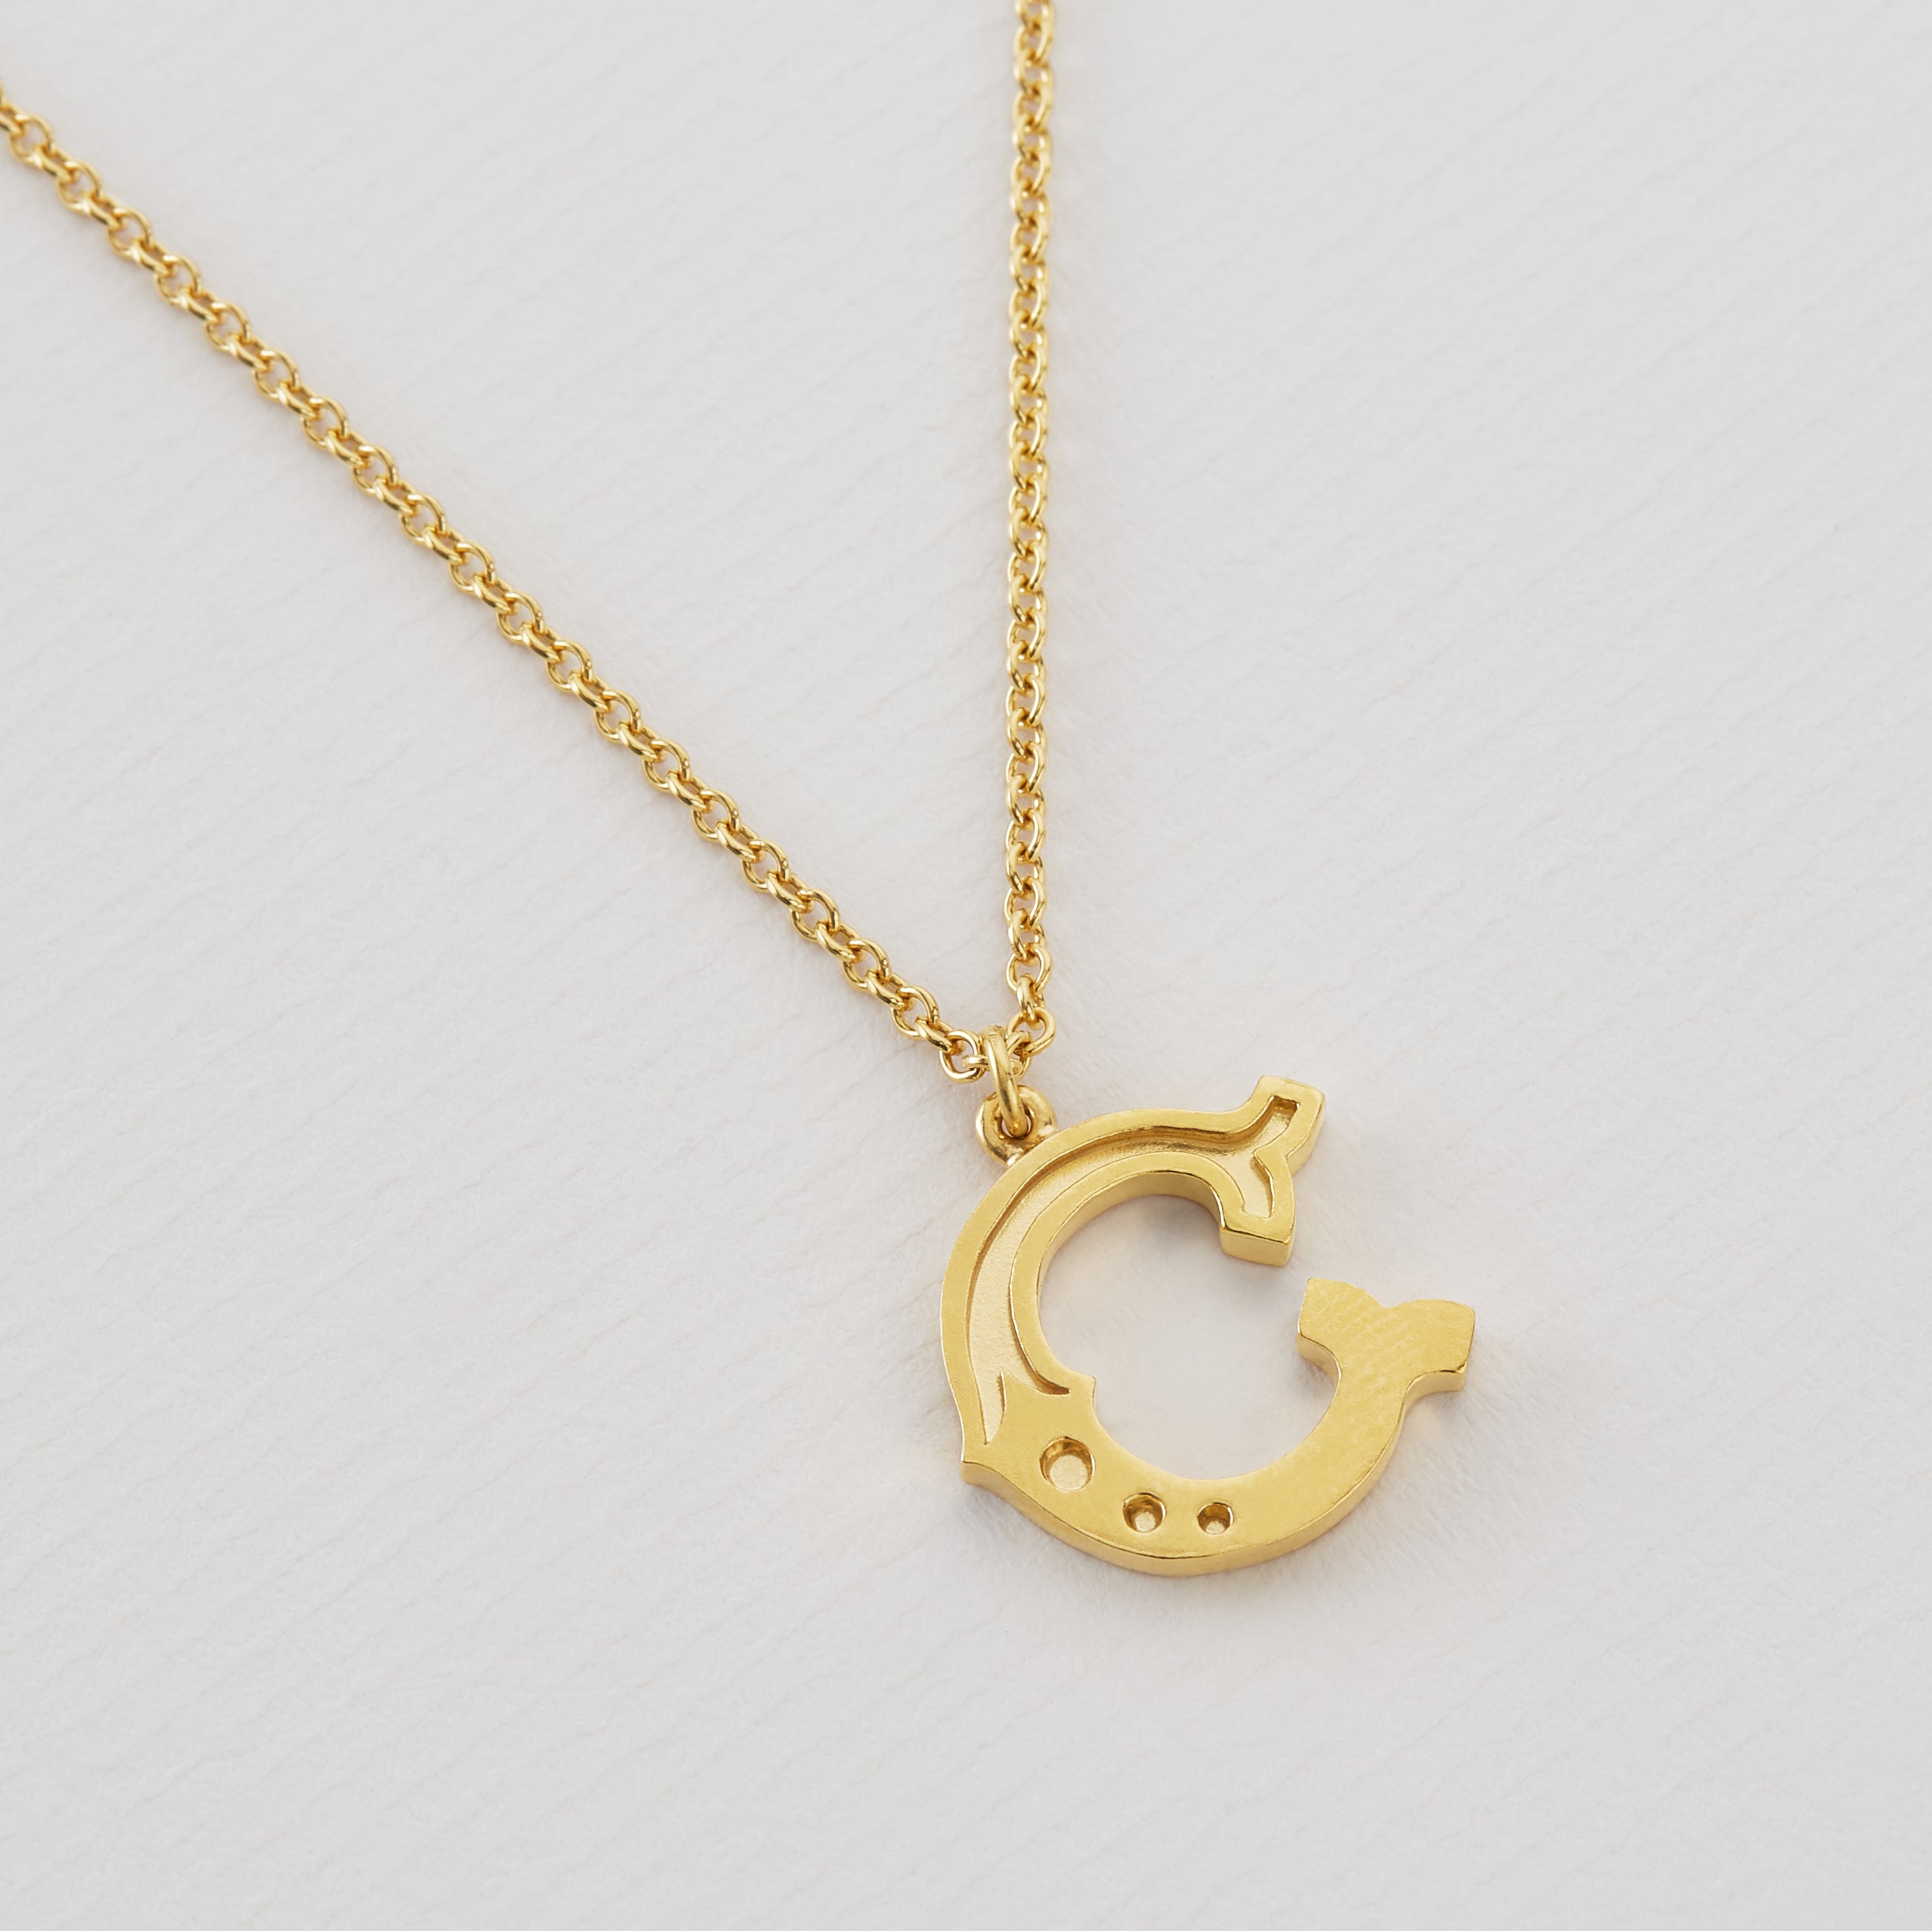 Initial Pendent Necklace Charm Letter C Finished in 18kt Yellow Gold -  CRISLU